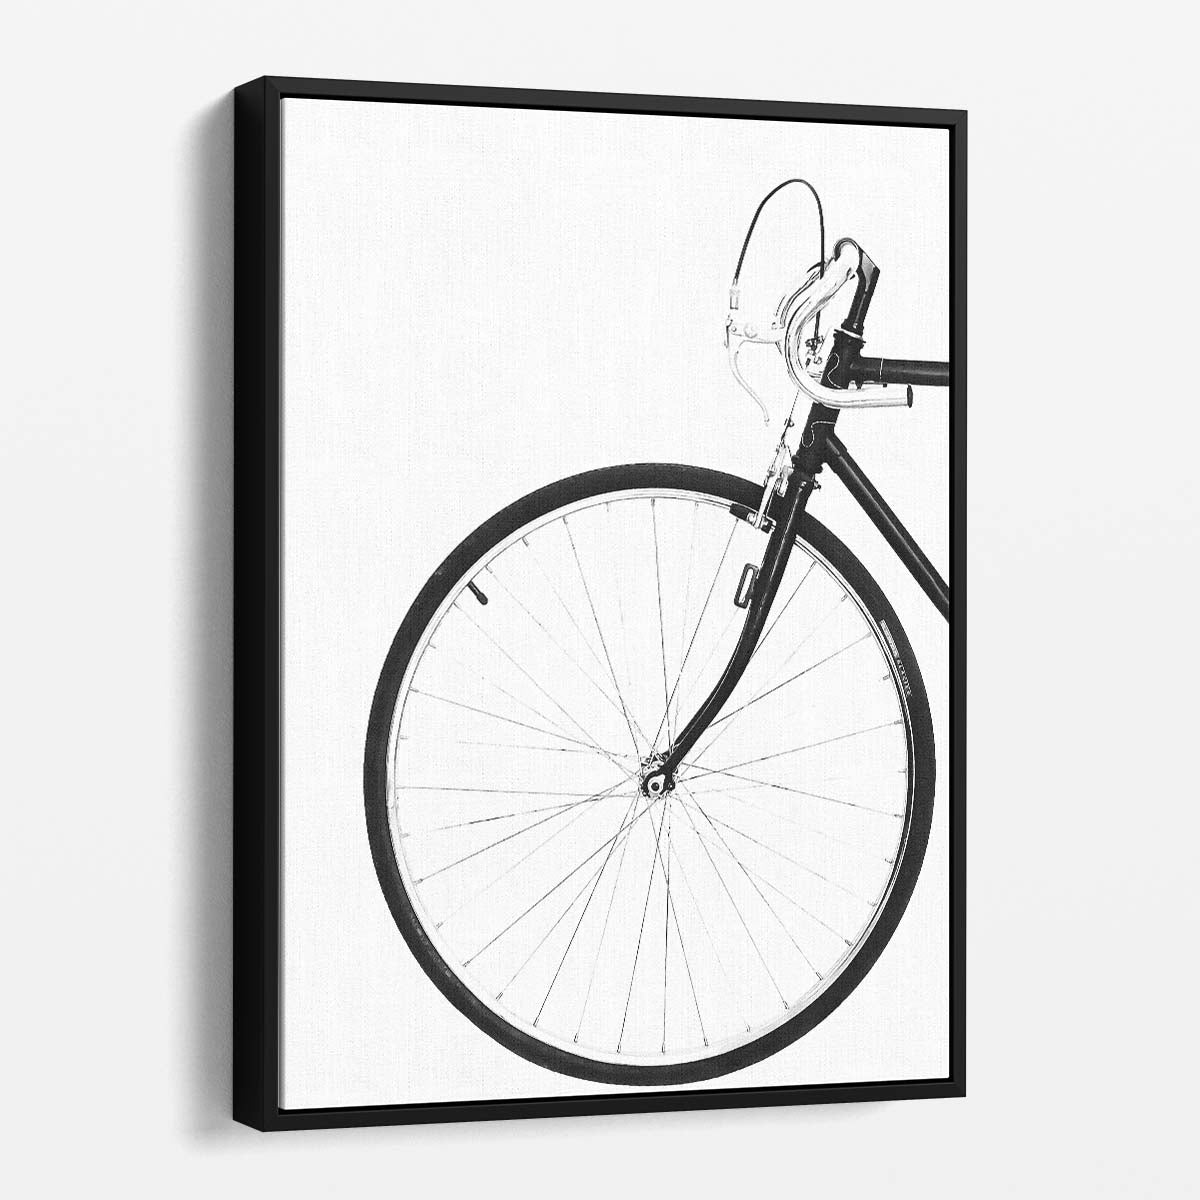 Monochrome Bicycle Still Life Photography by Kathrin Pienaar by Luxuriance Designs, made in USA